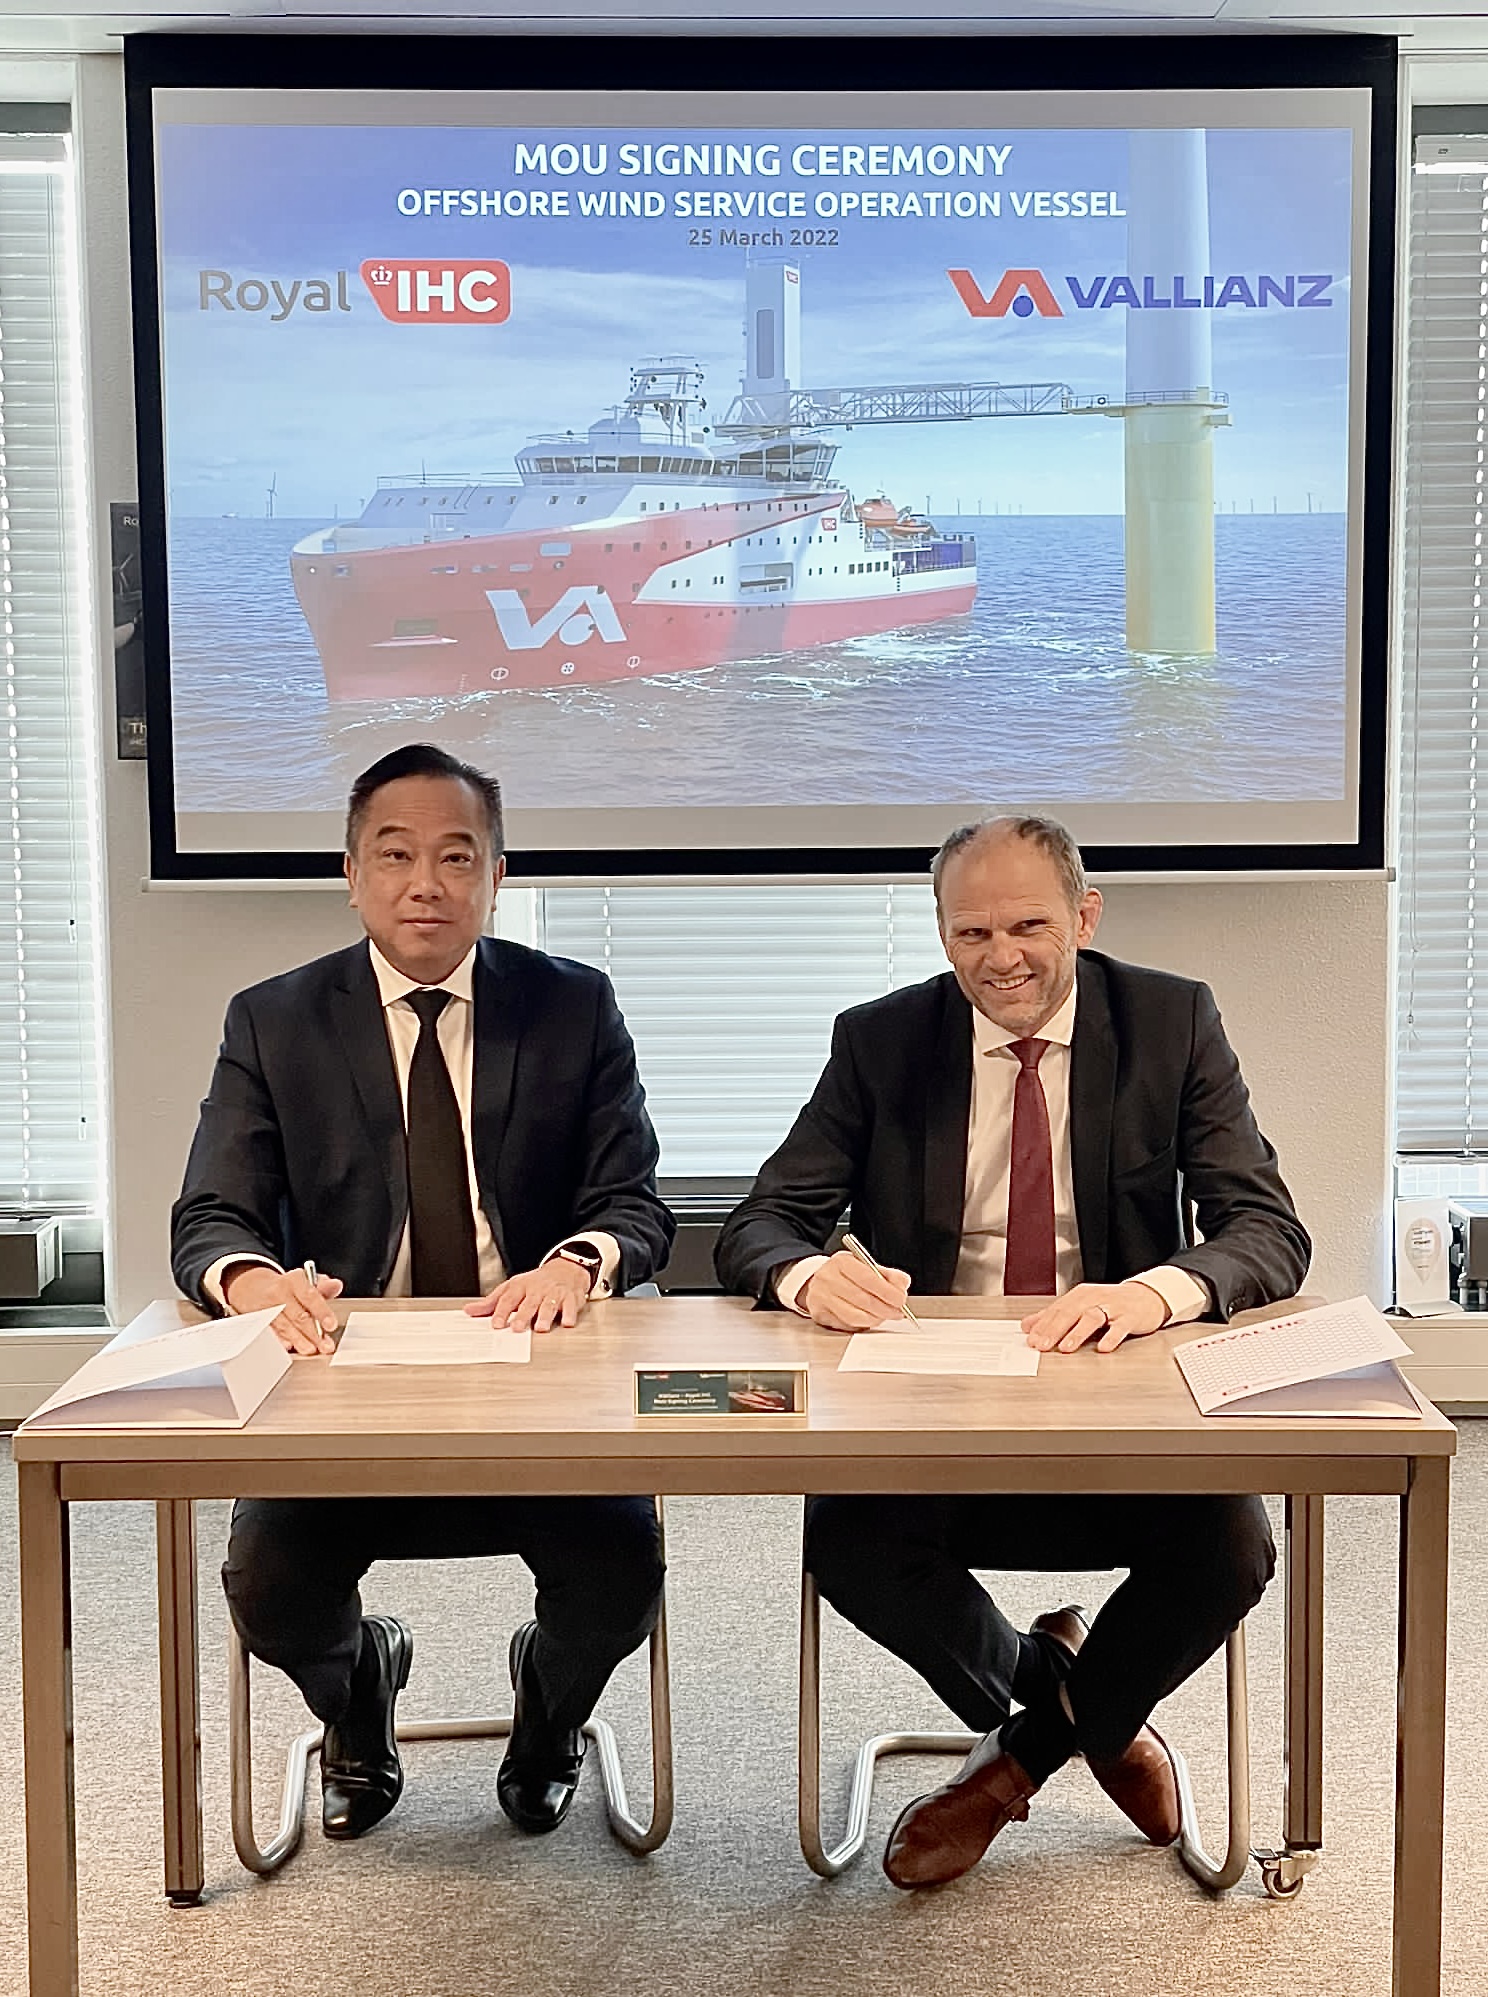 Vallianz and Royal IHC teaming up to develop a first-of-its-kind Service Operation Vessel